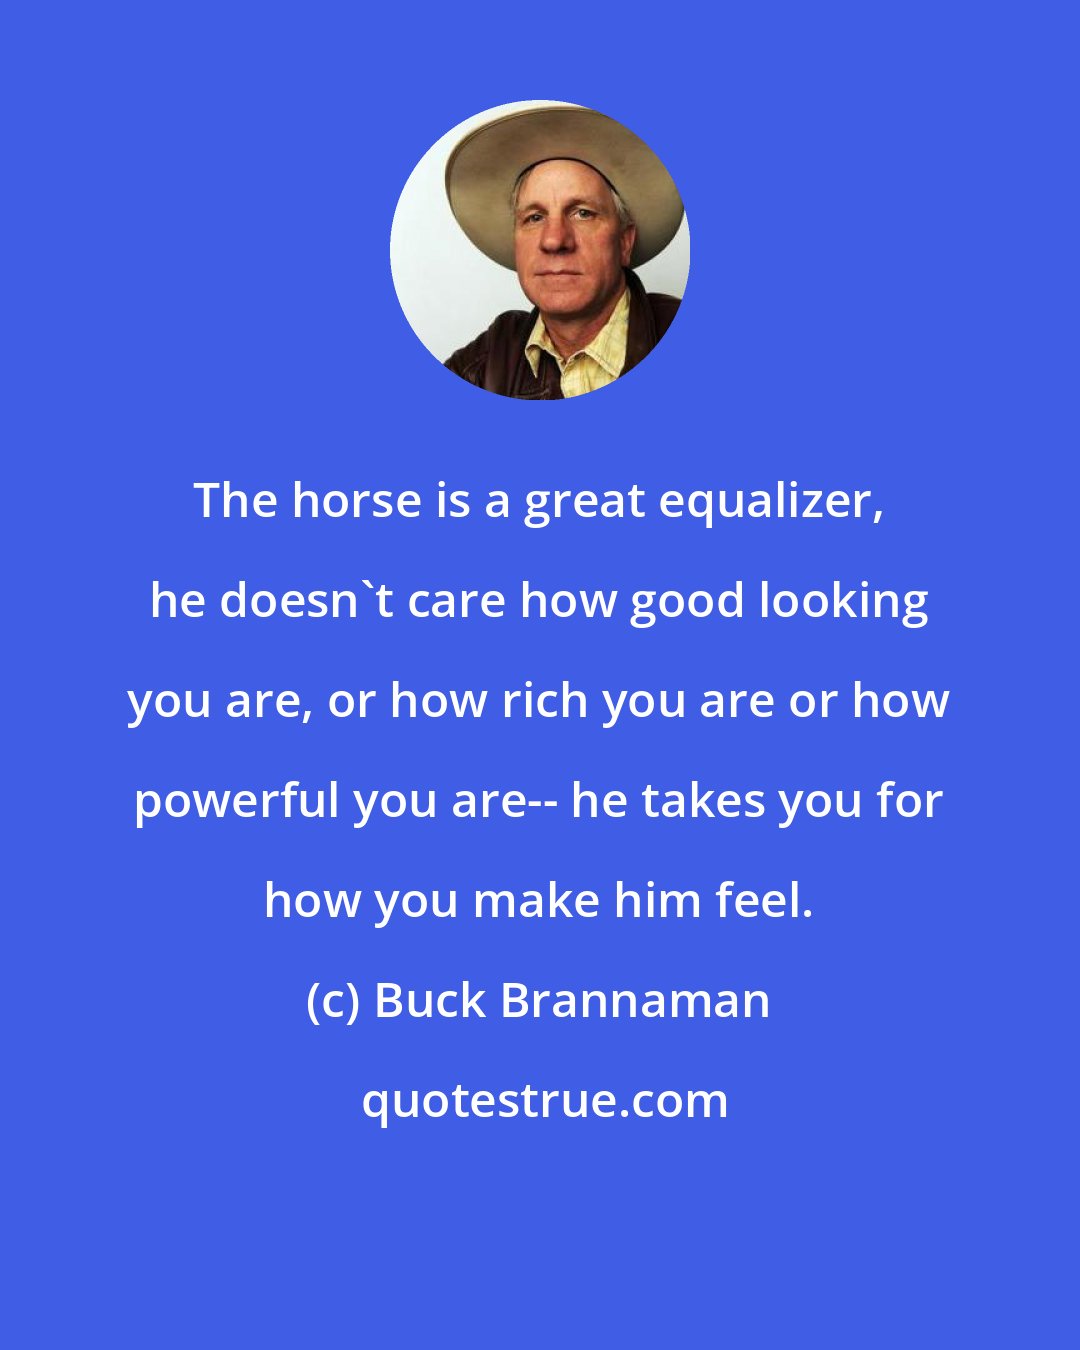 Buck Brannaman: The horse is a great equalizer, he doesn't care how good looking you are, or how rich you are or how powerful you are-- he takes you for how you make him feel.